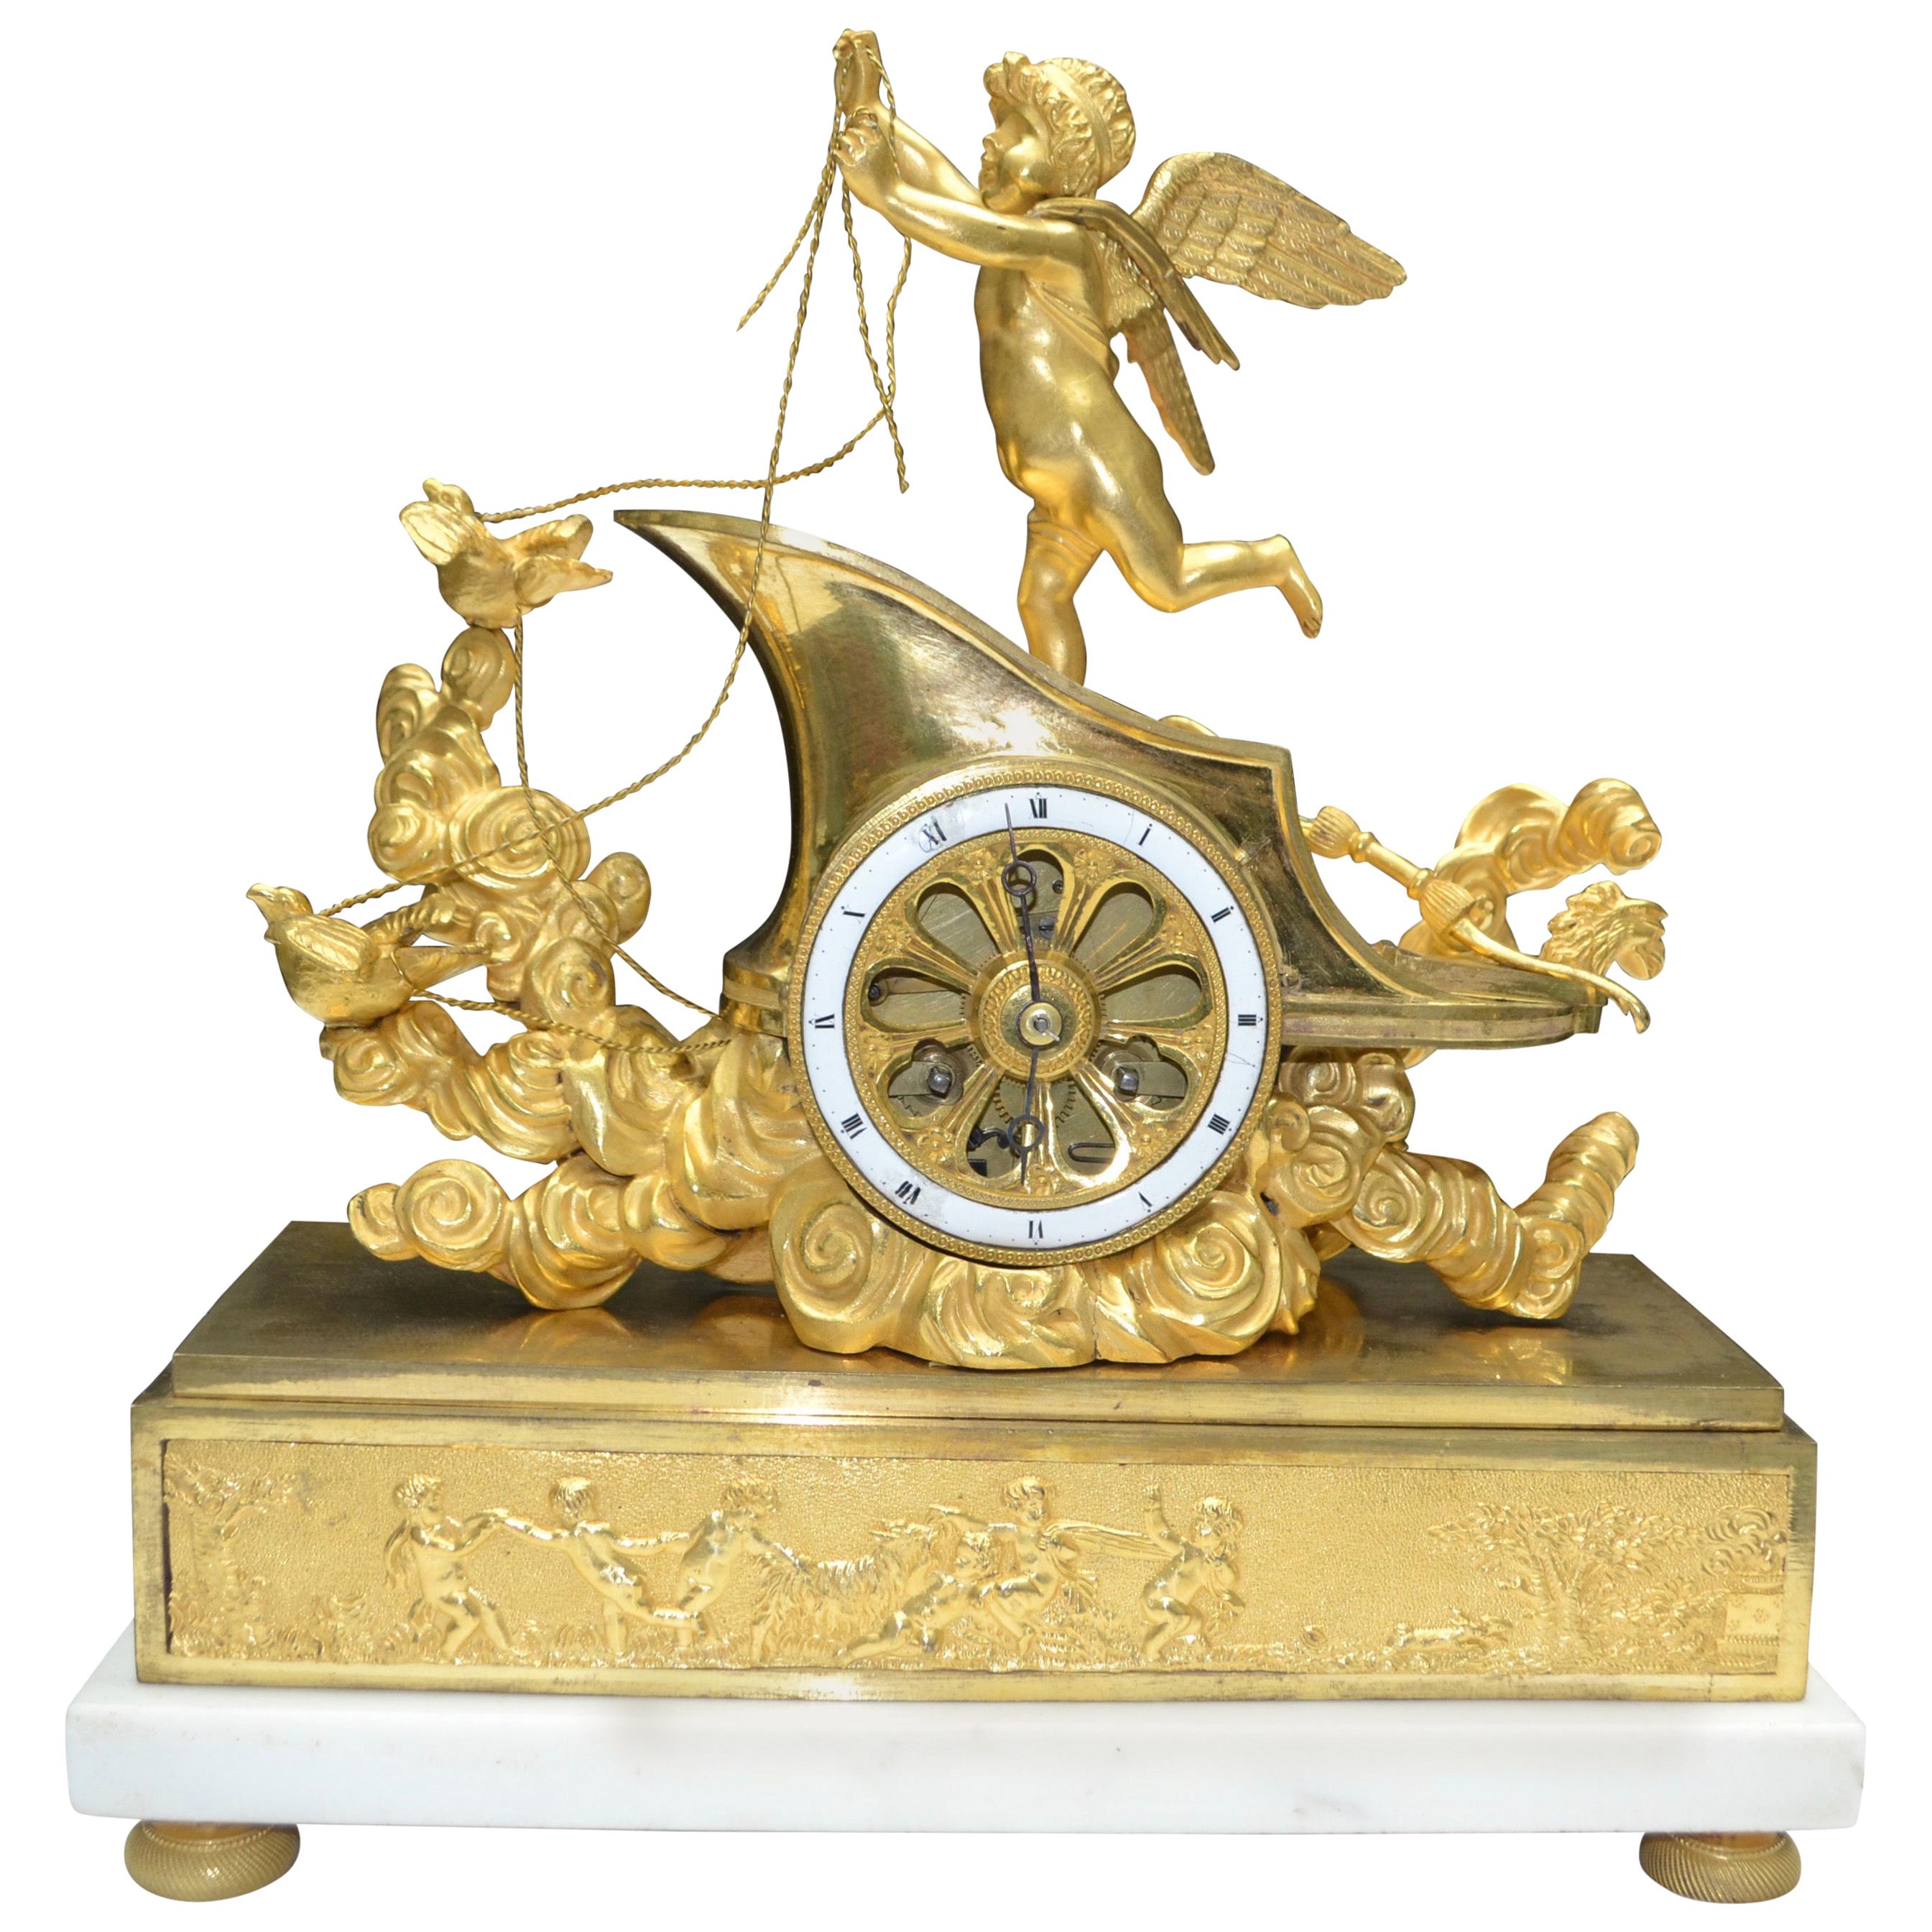 Period French Empire Mantle Clock